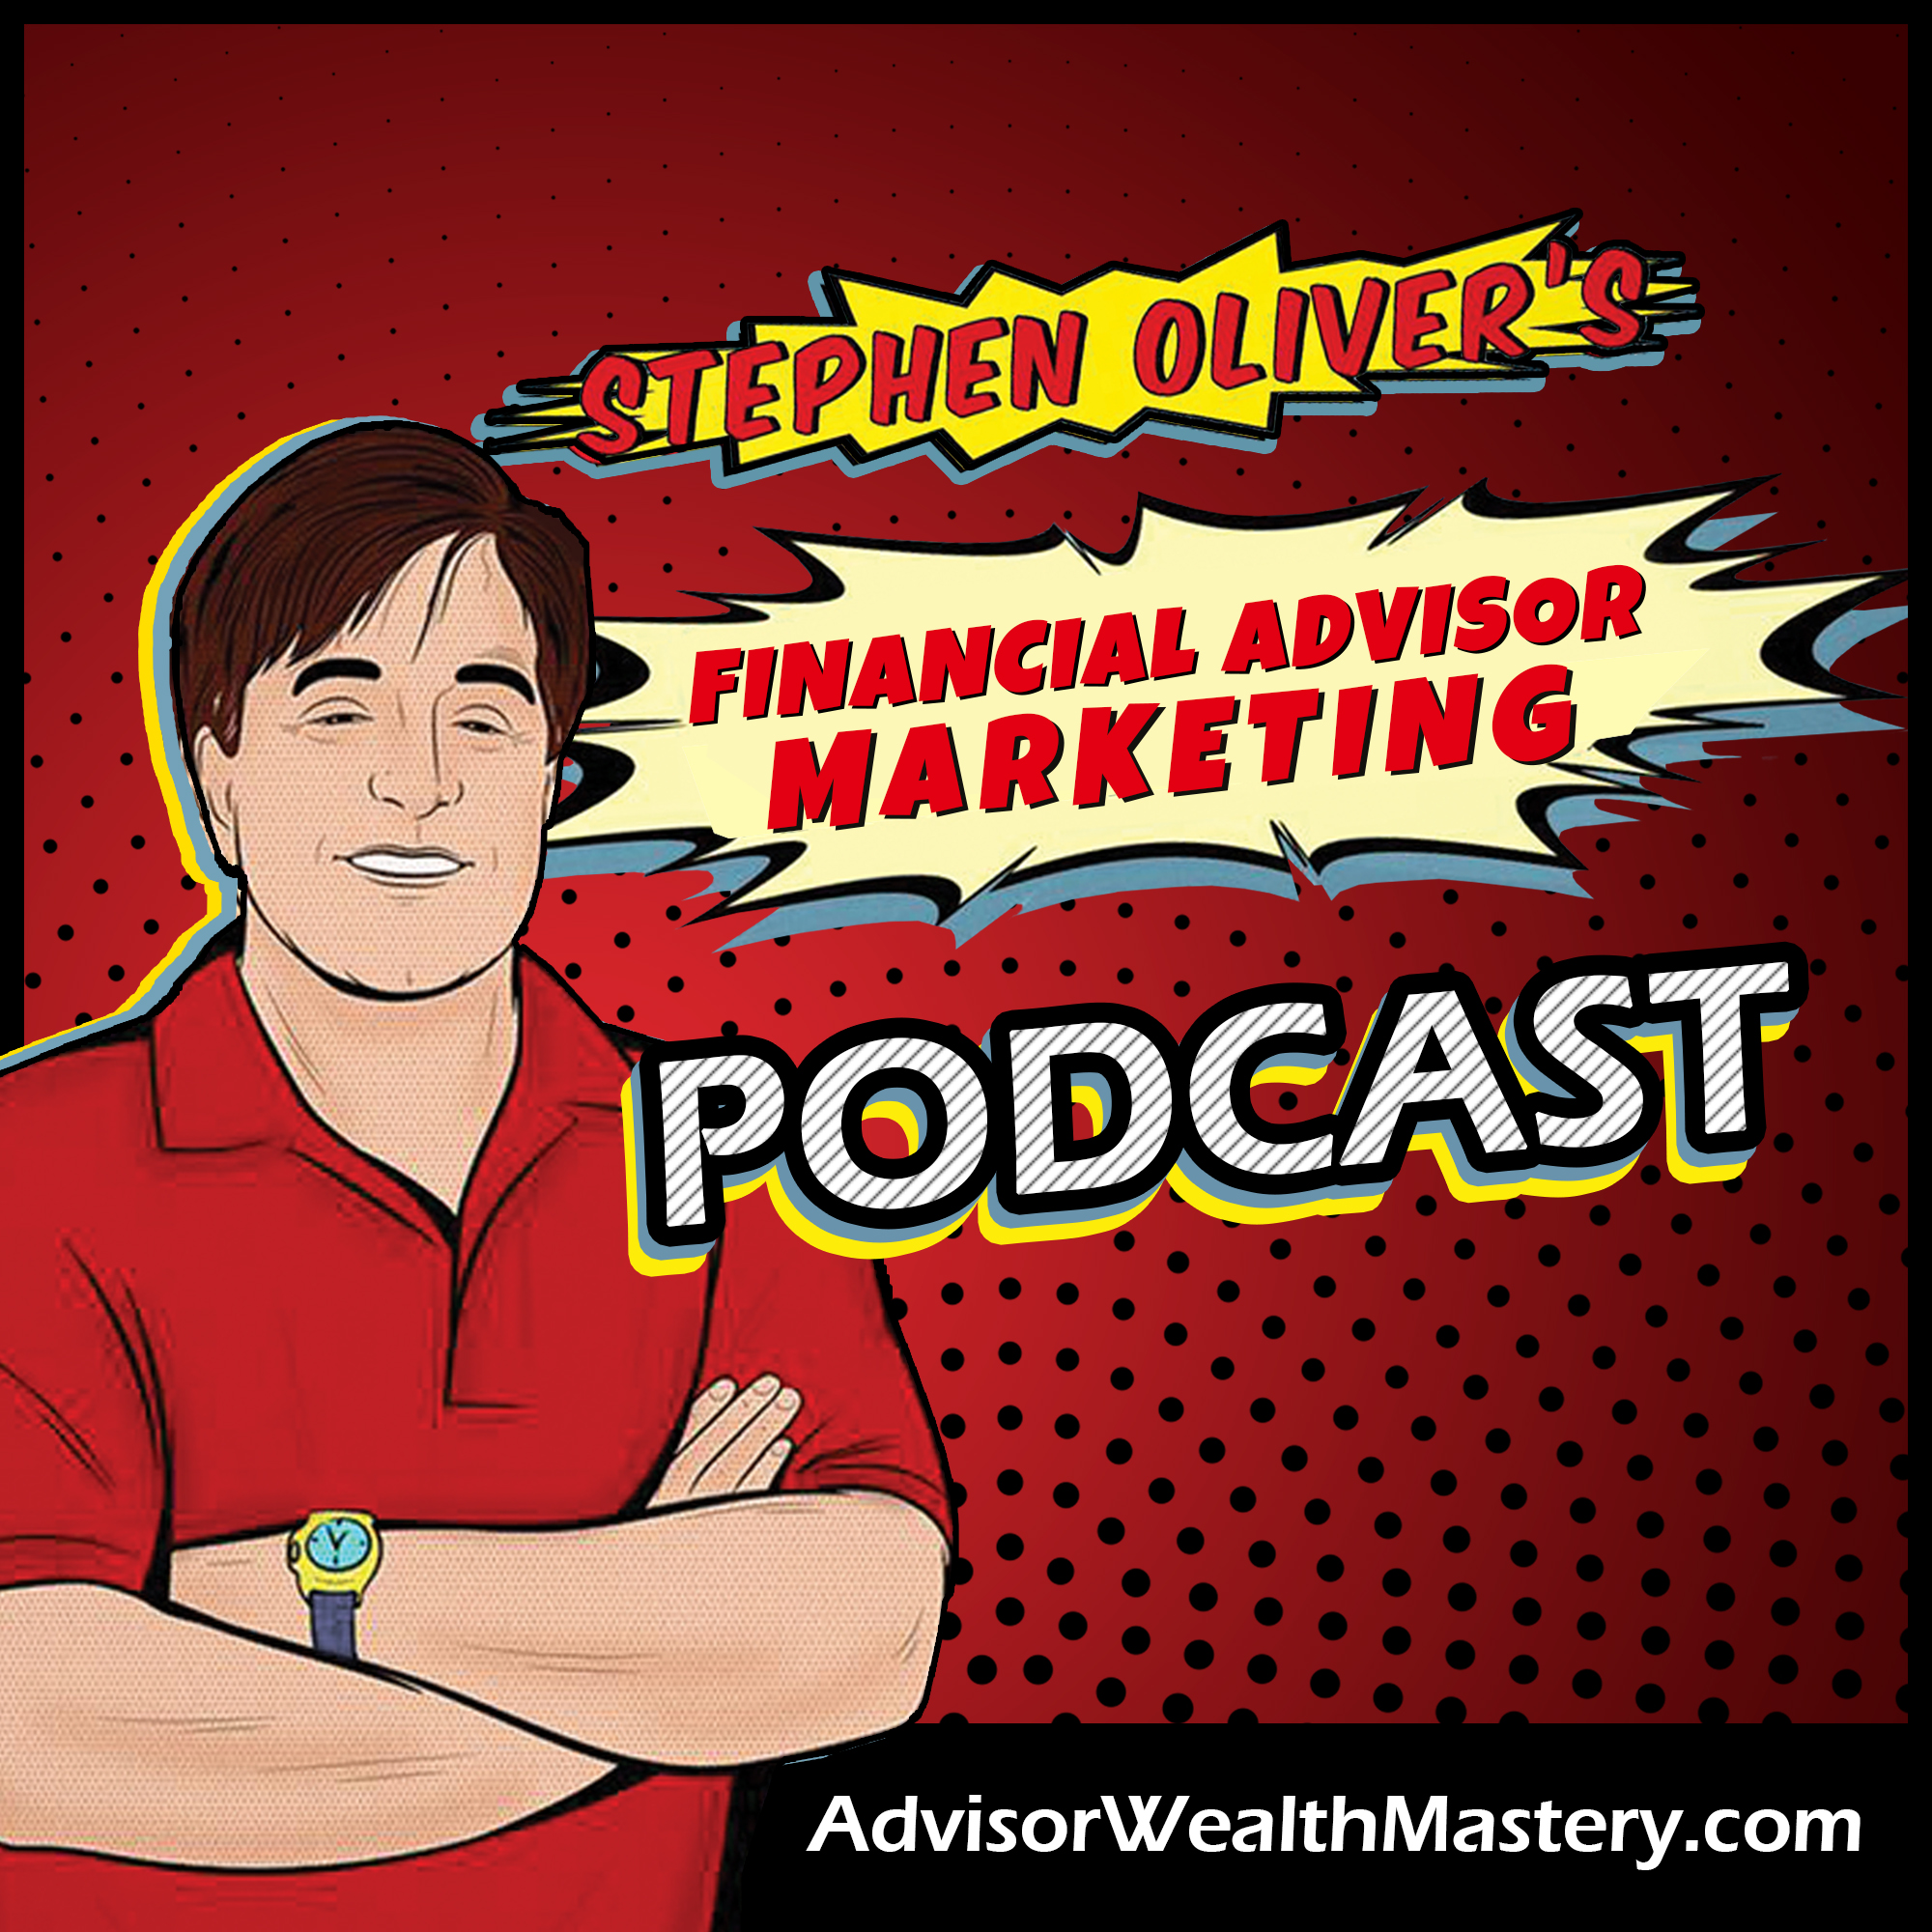 Podcasts | Stephen Oliver's Financial Advisor Wealth Mastery